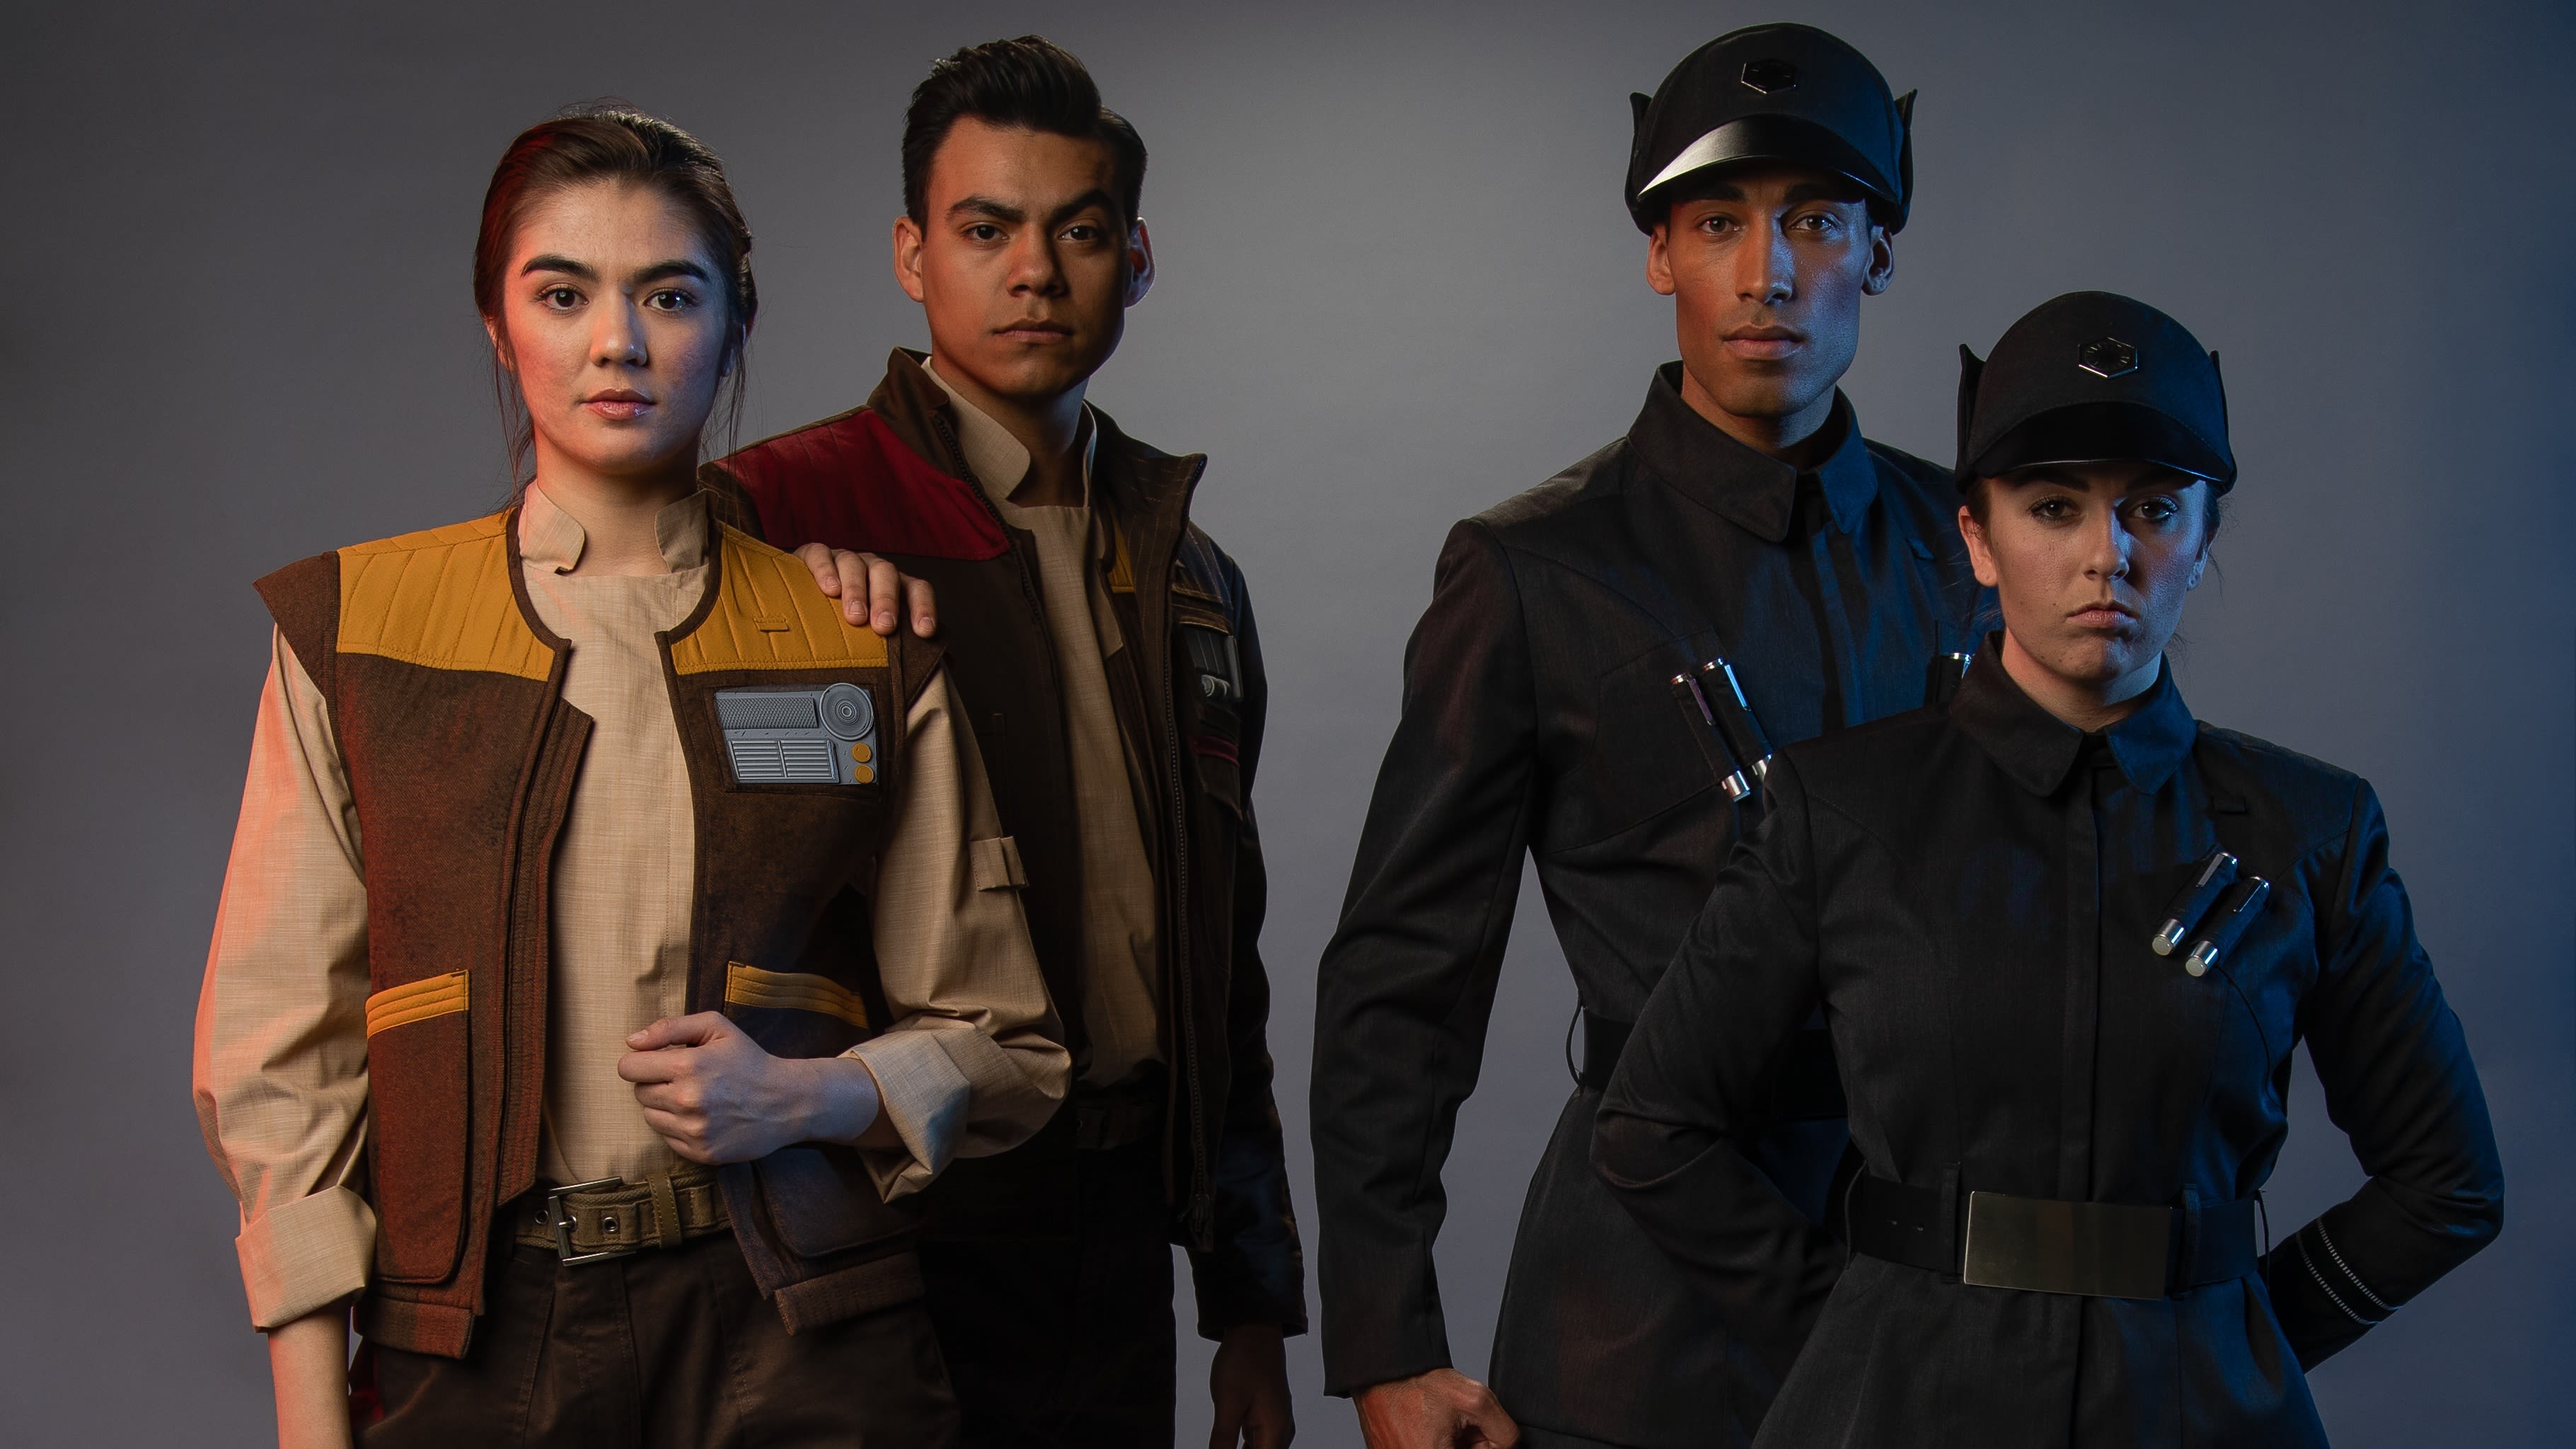 Galaxy's Edge's cast members all have unique backstories and costumes